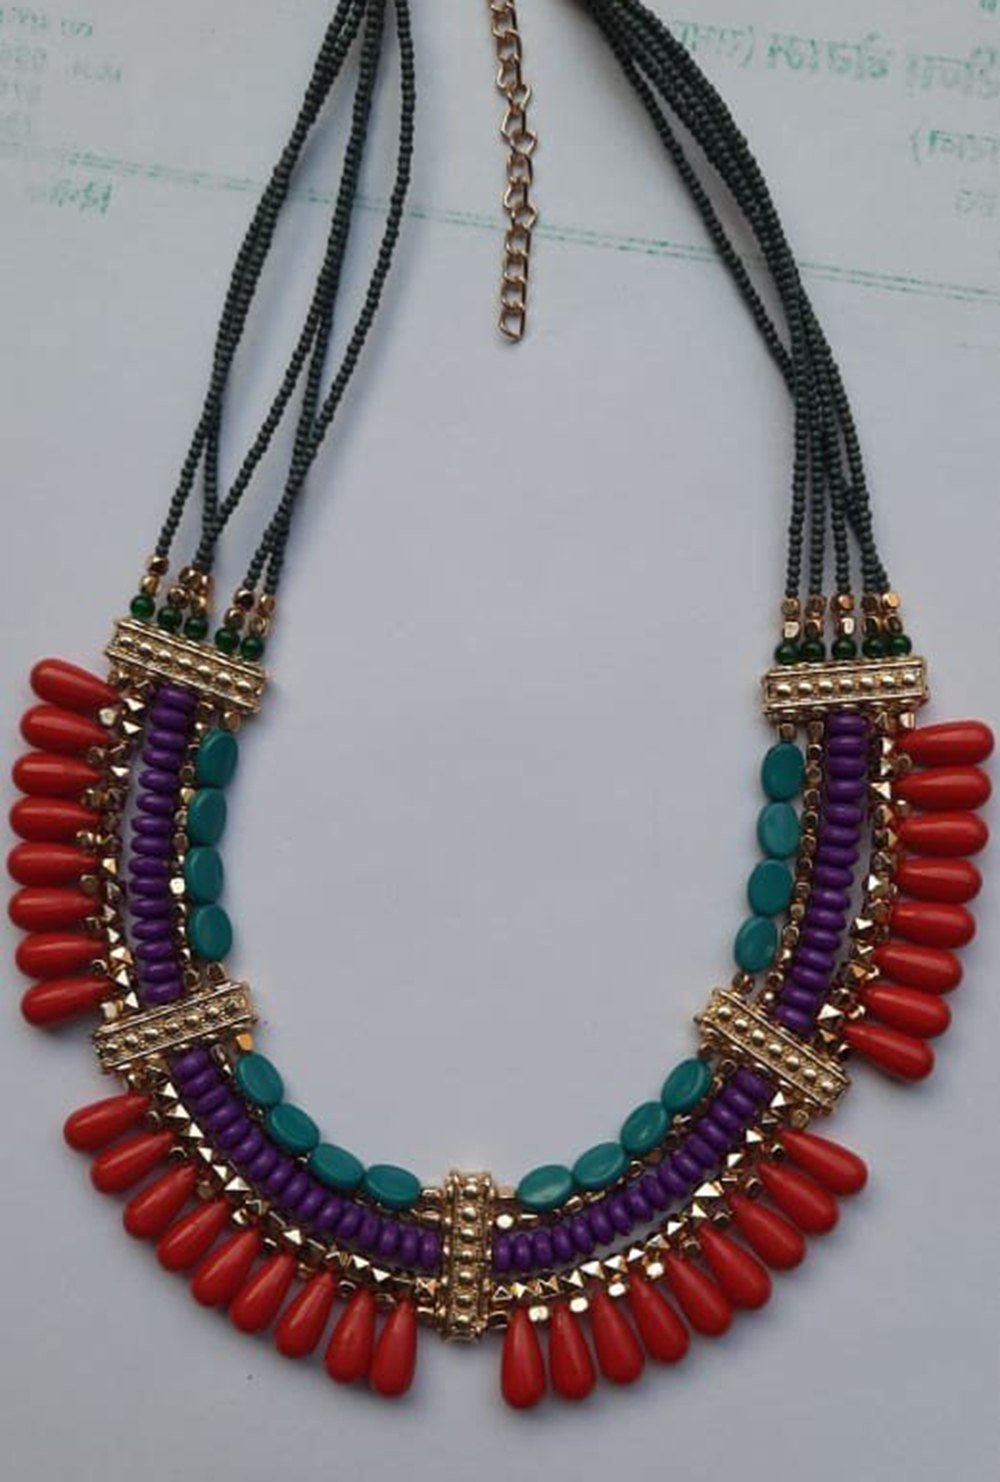 Handcrafted Bead Necklace